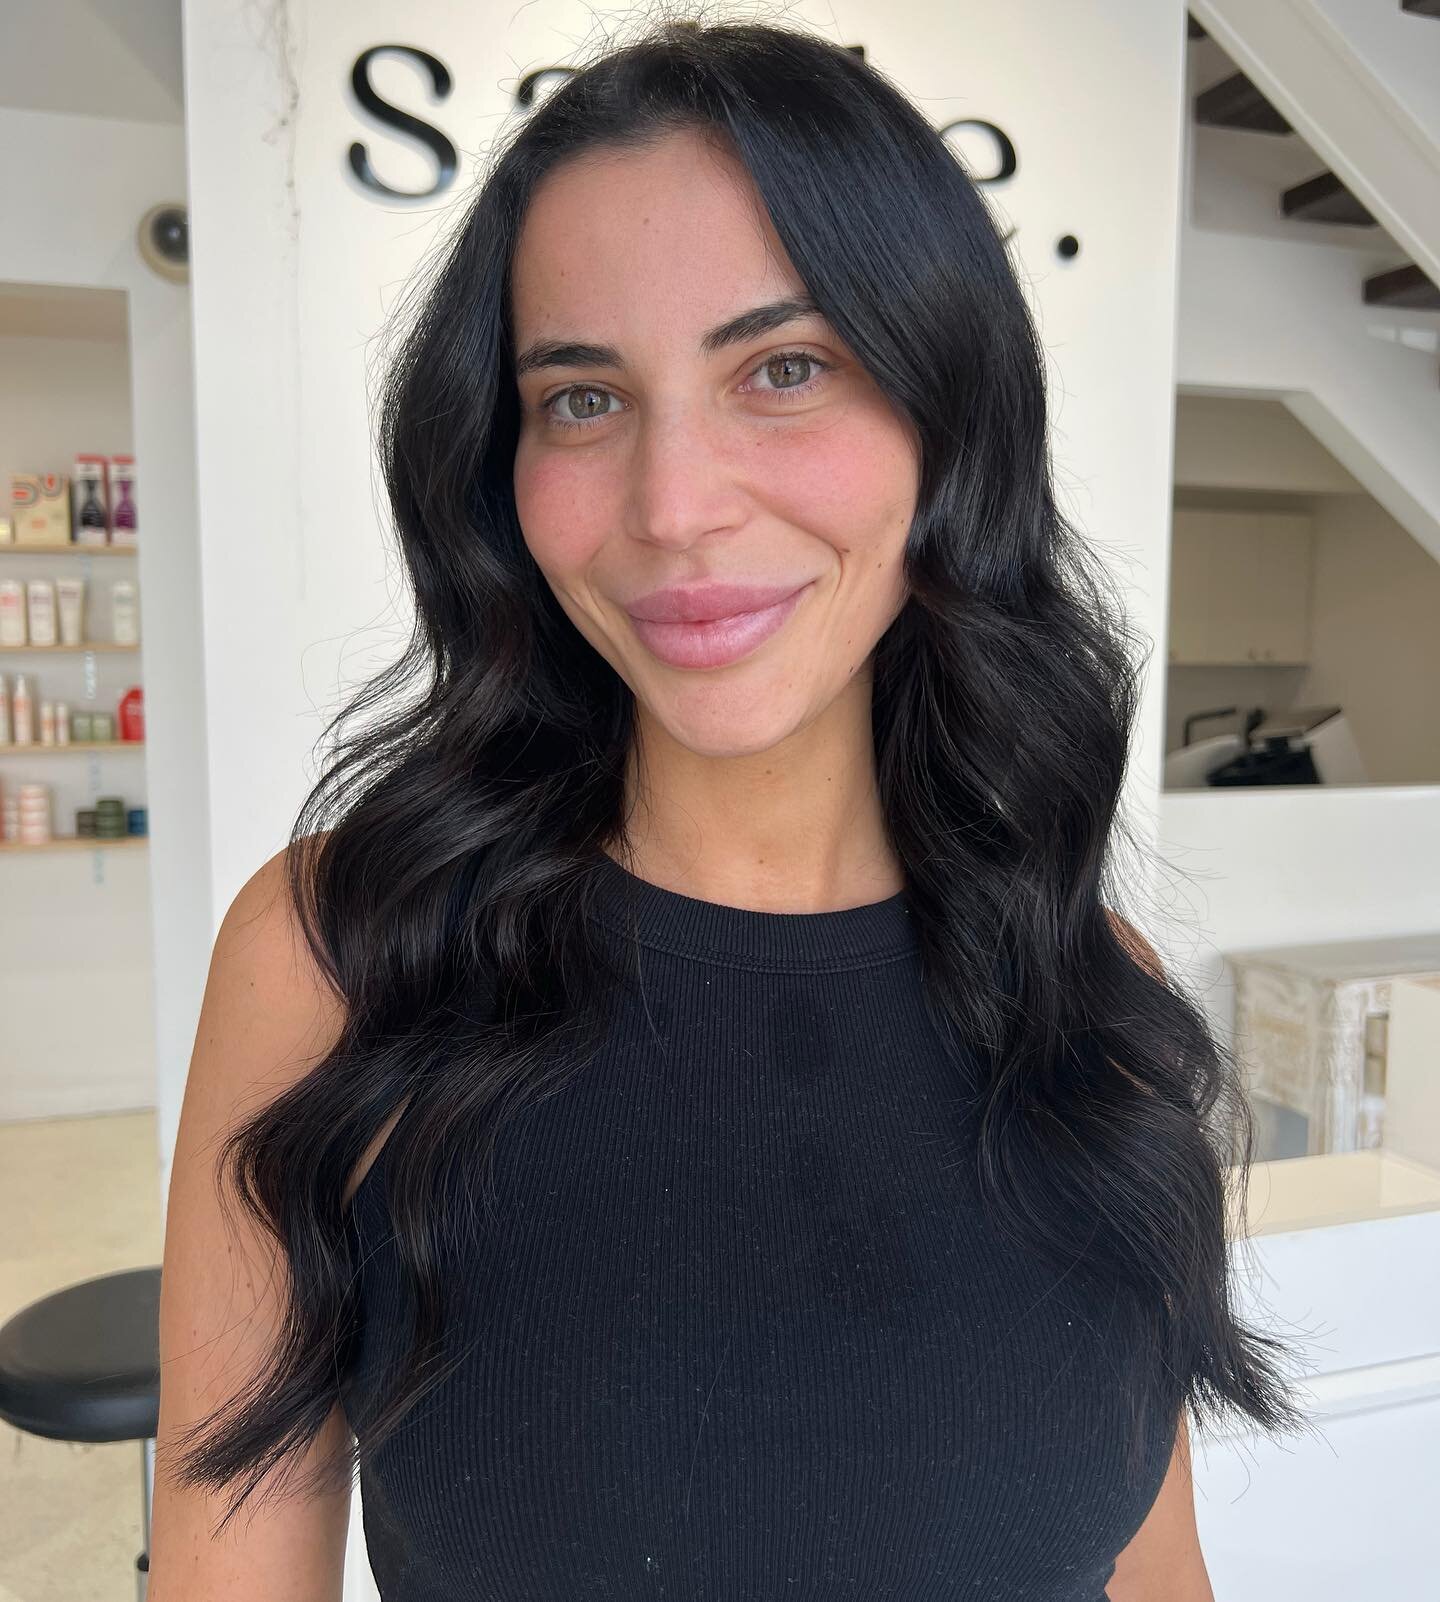 Deluxe &ldquo;genius&rdquo; welf installed by @lauren.sablesalonandspa 

100g of 20inch extensions in almost onyx and charcoal 🥰